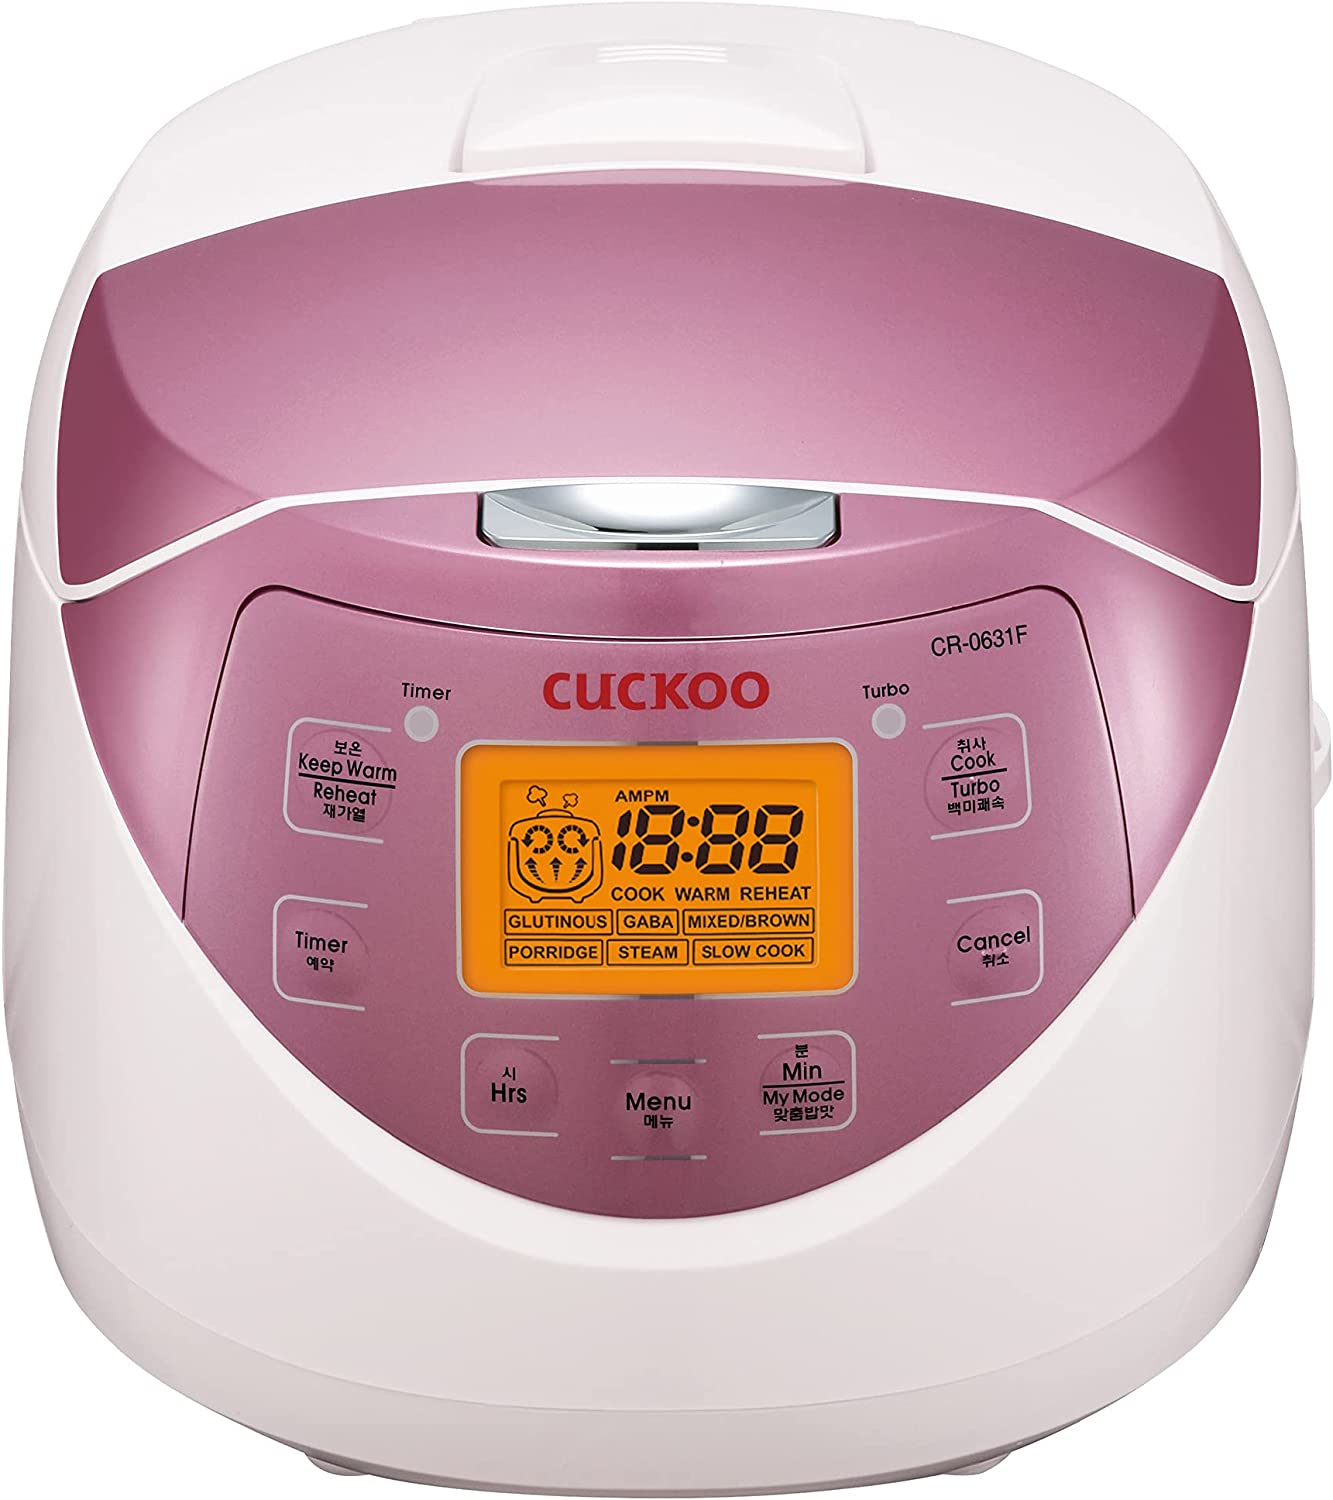 Cuckoo Micom Rice Cooker with 8 Menu Options, 6-Cup (Uncooked)